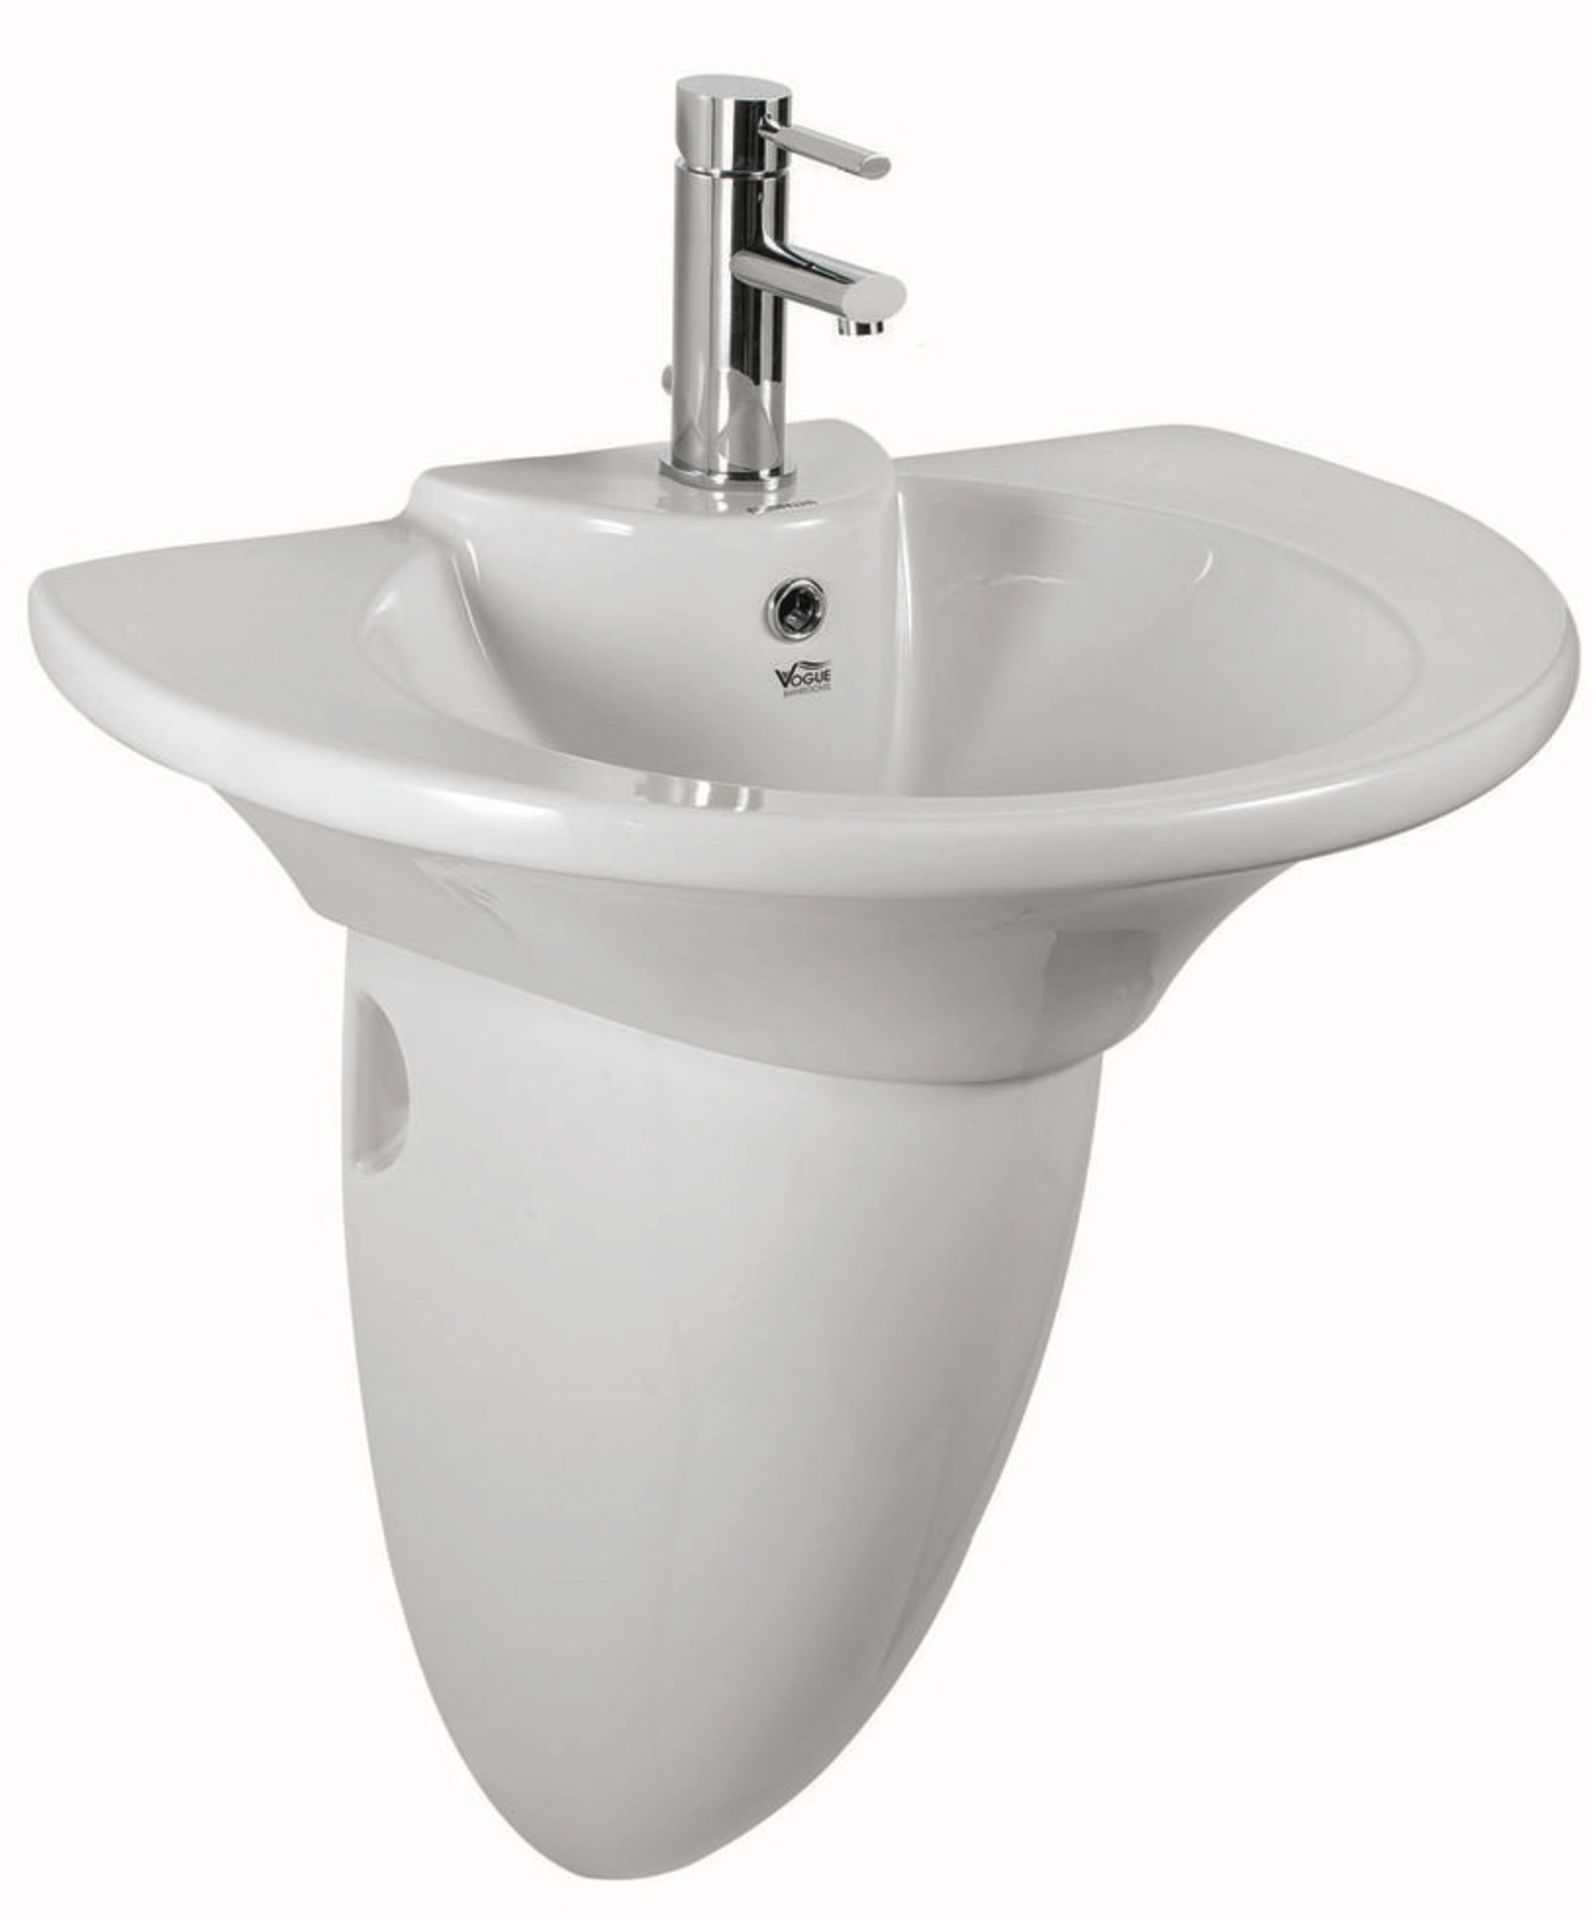 10 x Vogue Tarifa 1th 630mm Wall Hung Bathroom Sink Basins with Semi Pedestals - Brand New and Boxed